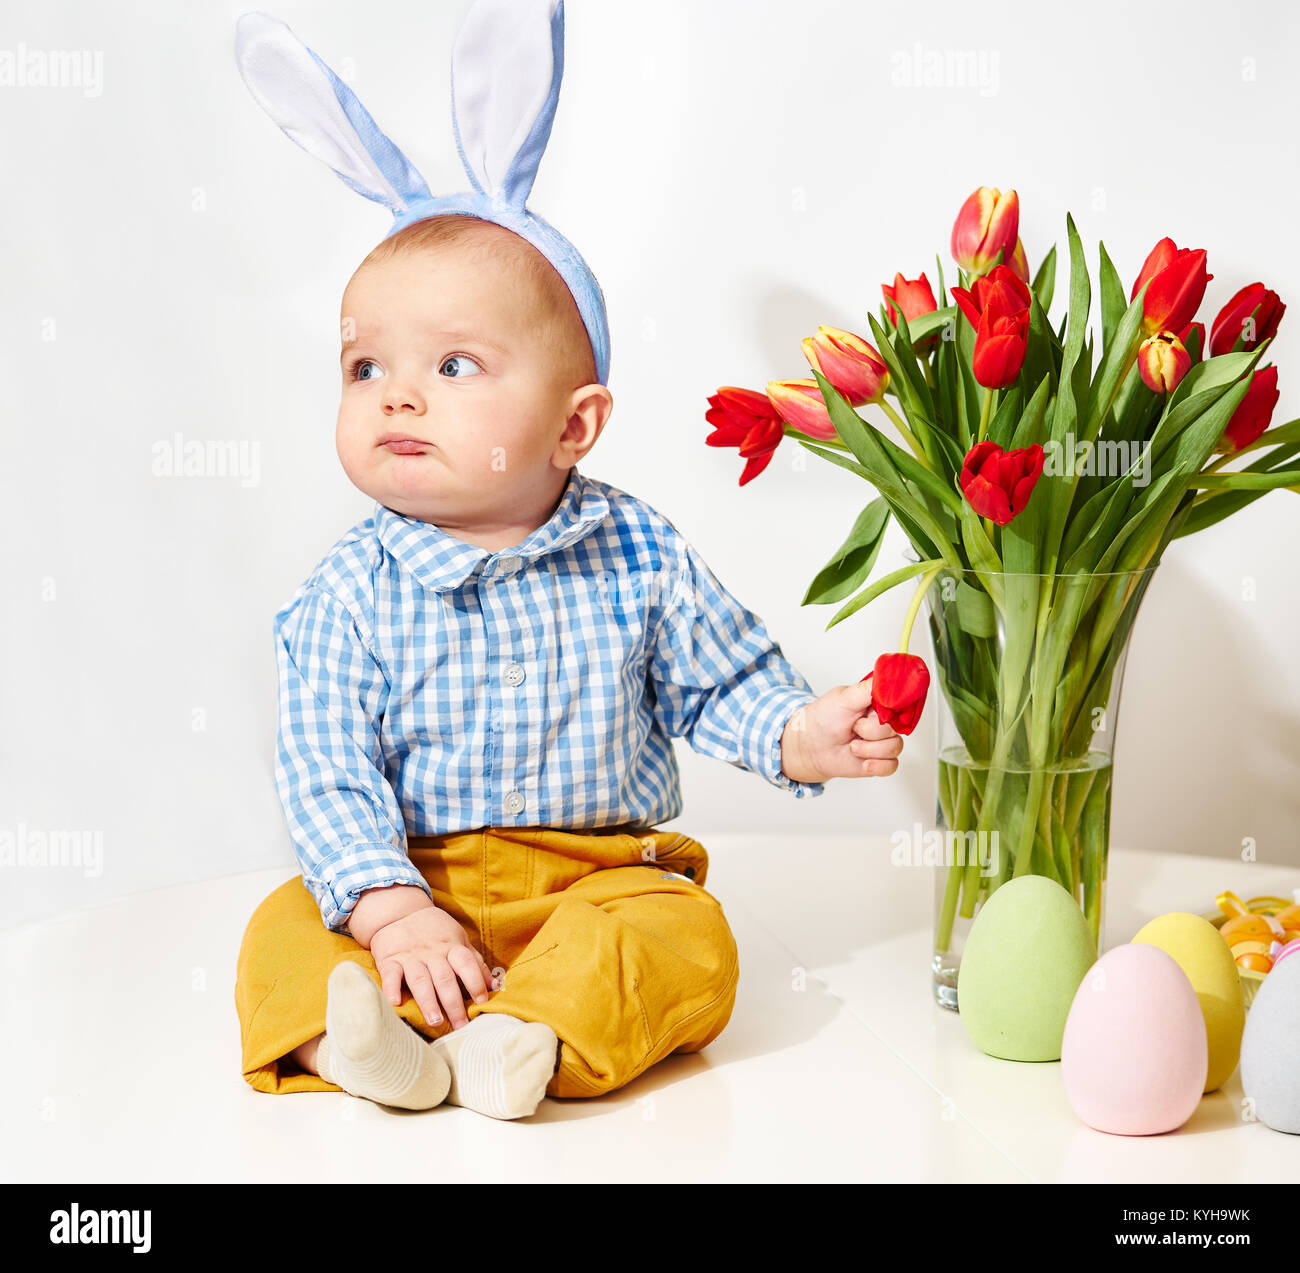 Funny baby boy with bunnies ears Stock Photo